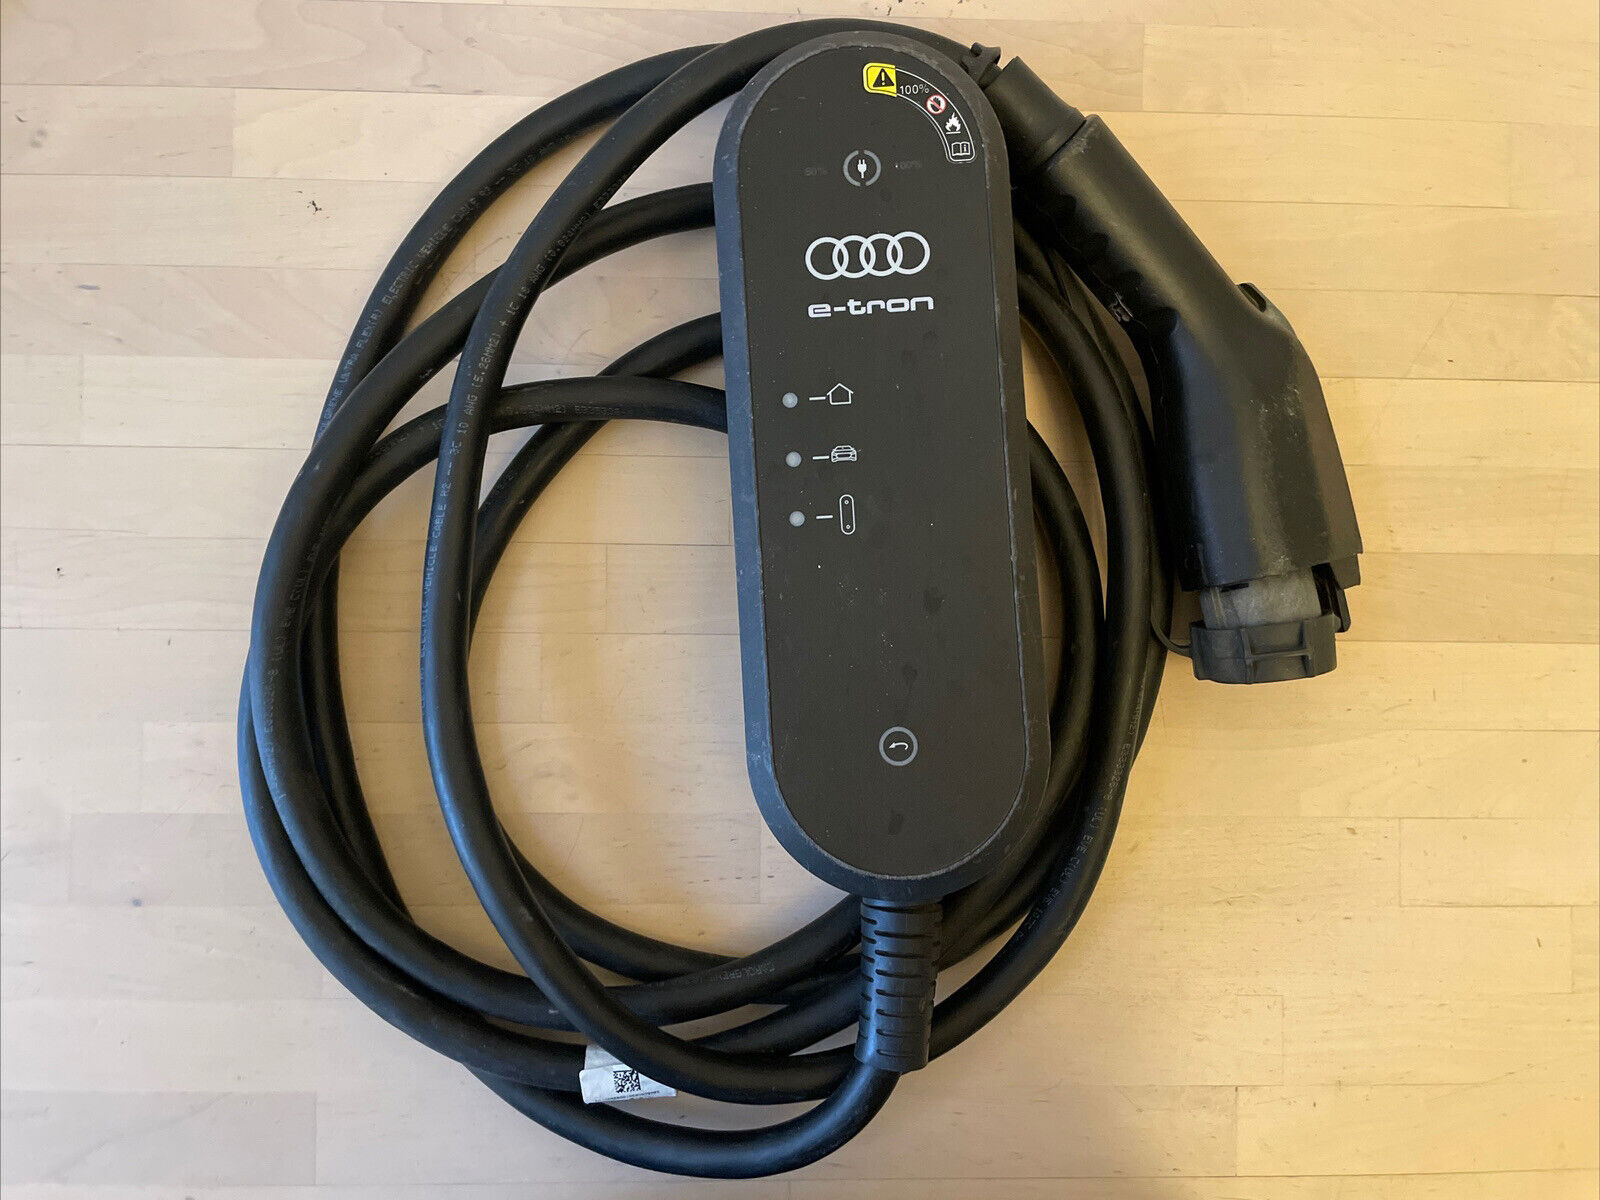 AUDI E-TRON EV CHARGER KIT 9.6KW 40A OEM CABLE CHARGING - NO ADAPTERS INCLUDED